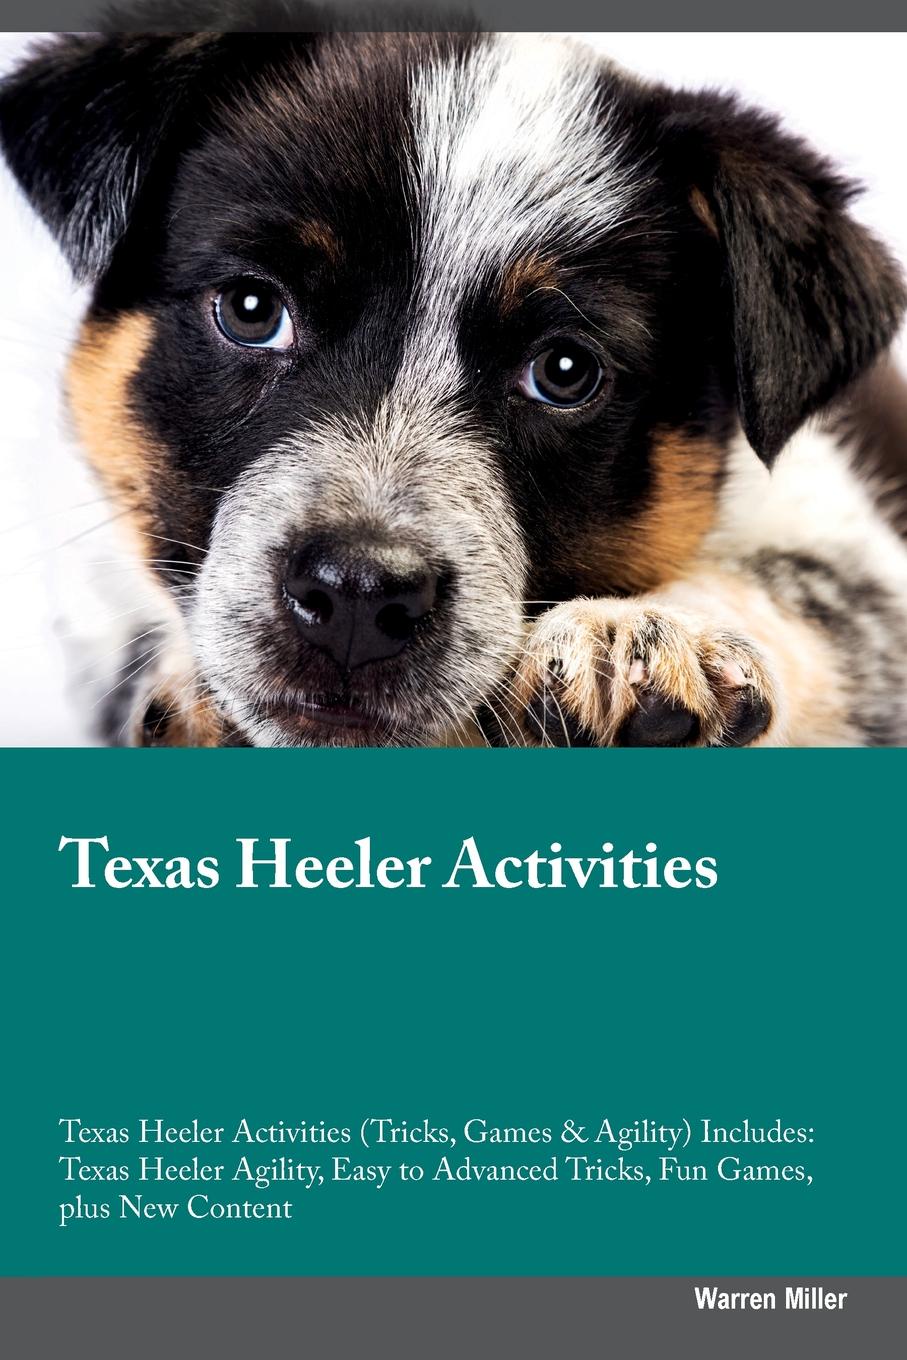 Texas Heeler Activities Texas Heeler Activities (Tricks, Games & Agility) Includes. Texas Heeler Agility, Easy to Advanced Tricks, Fun Games, plus New Content